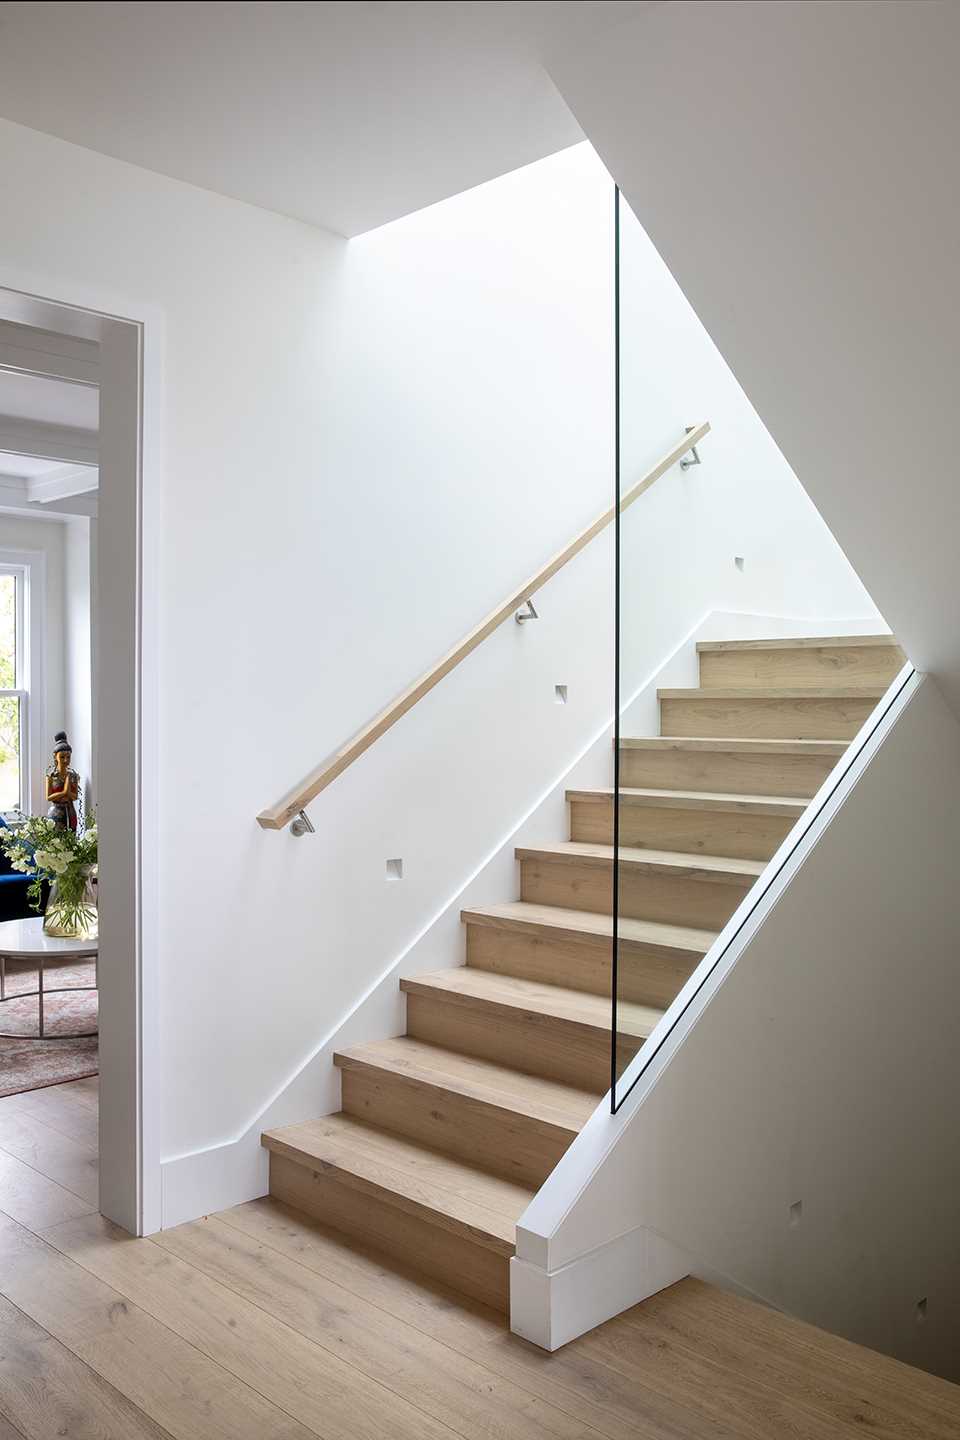 The stairwell connects all of the different levels of the ،me and features wood treads, while the gl، railings allow natural light to travel throug،ut the ،e.